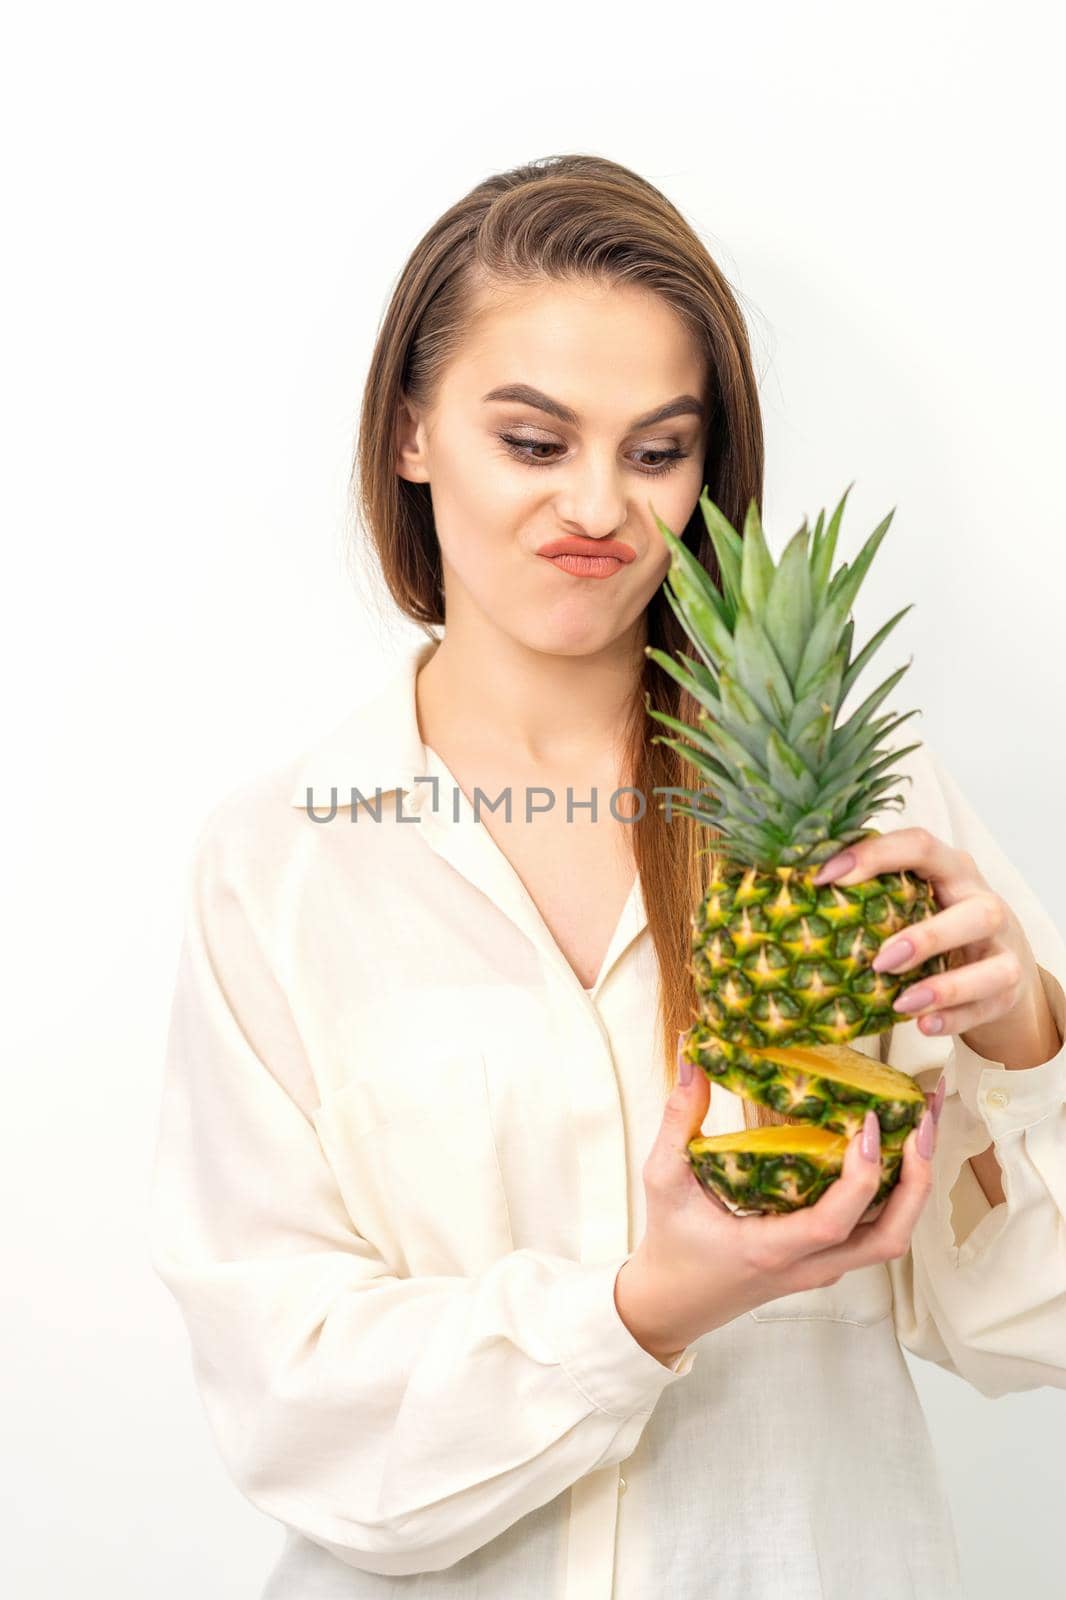 Beautiful young Caucasian woman holding pineapple and disappointed looking wearing a white shirt over white background. by okskukuruza